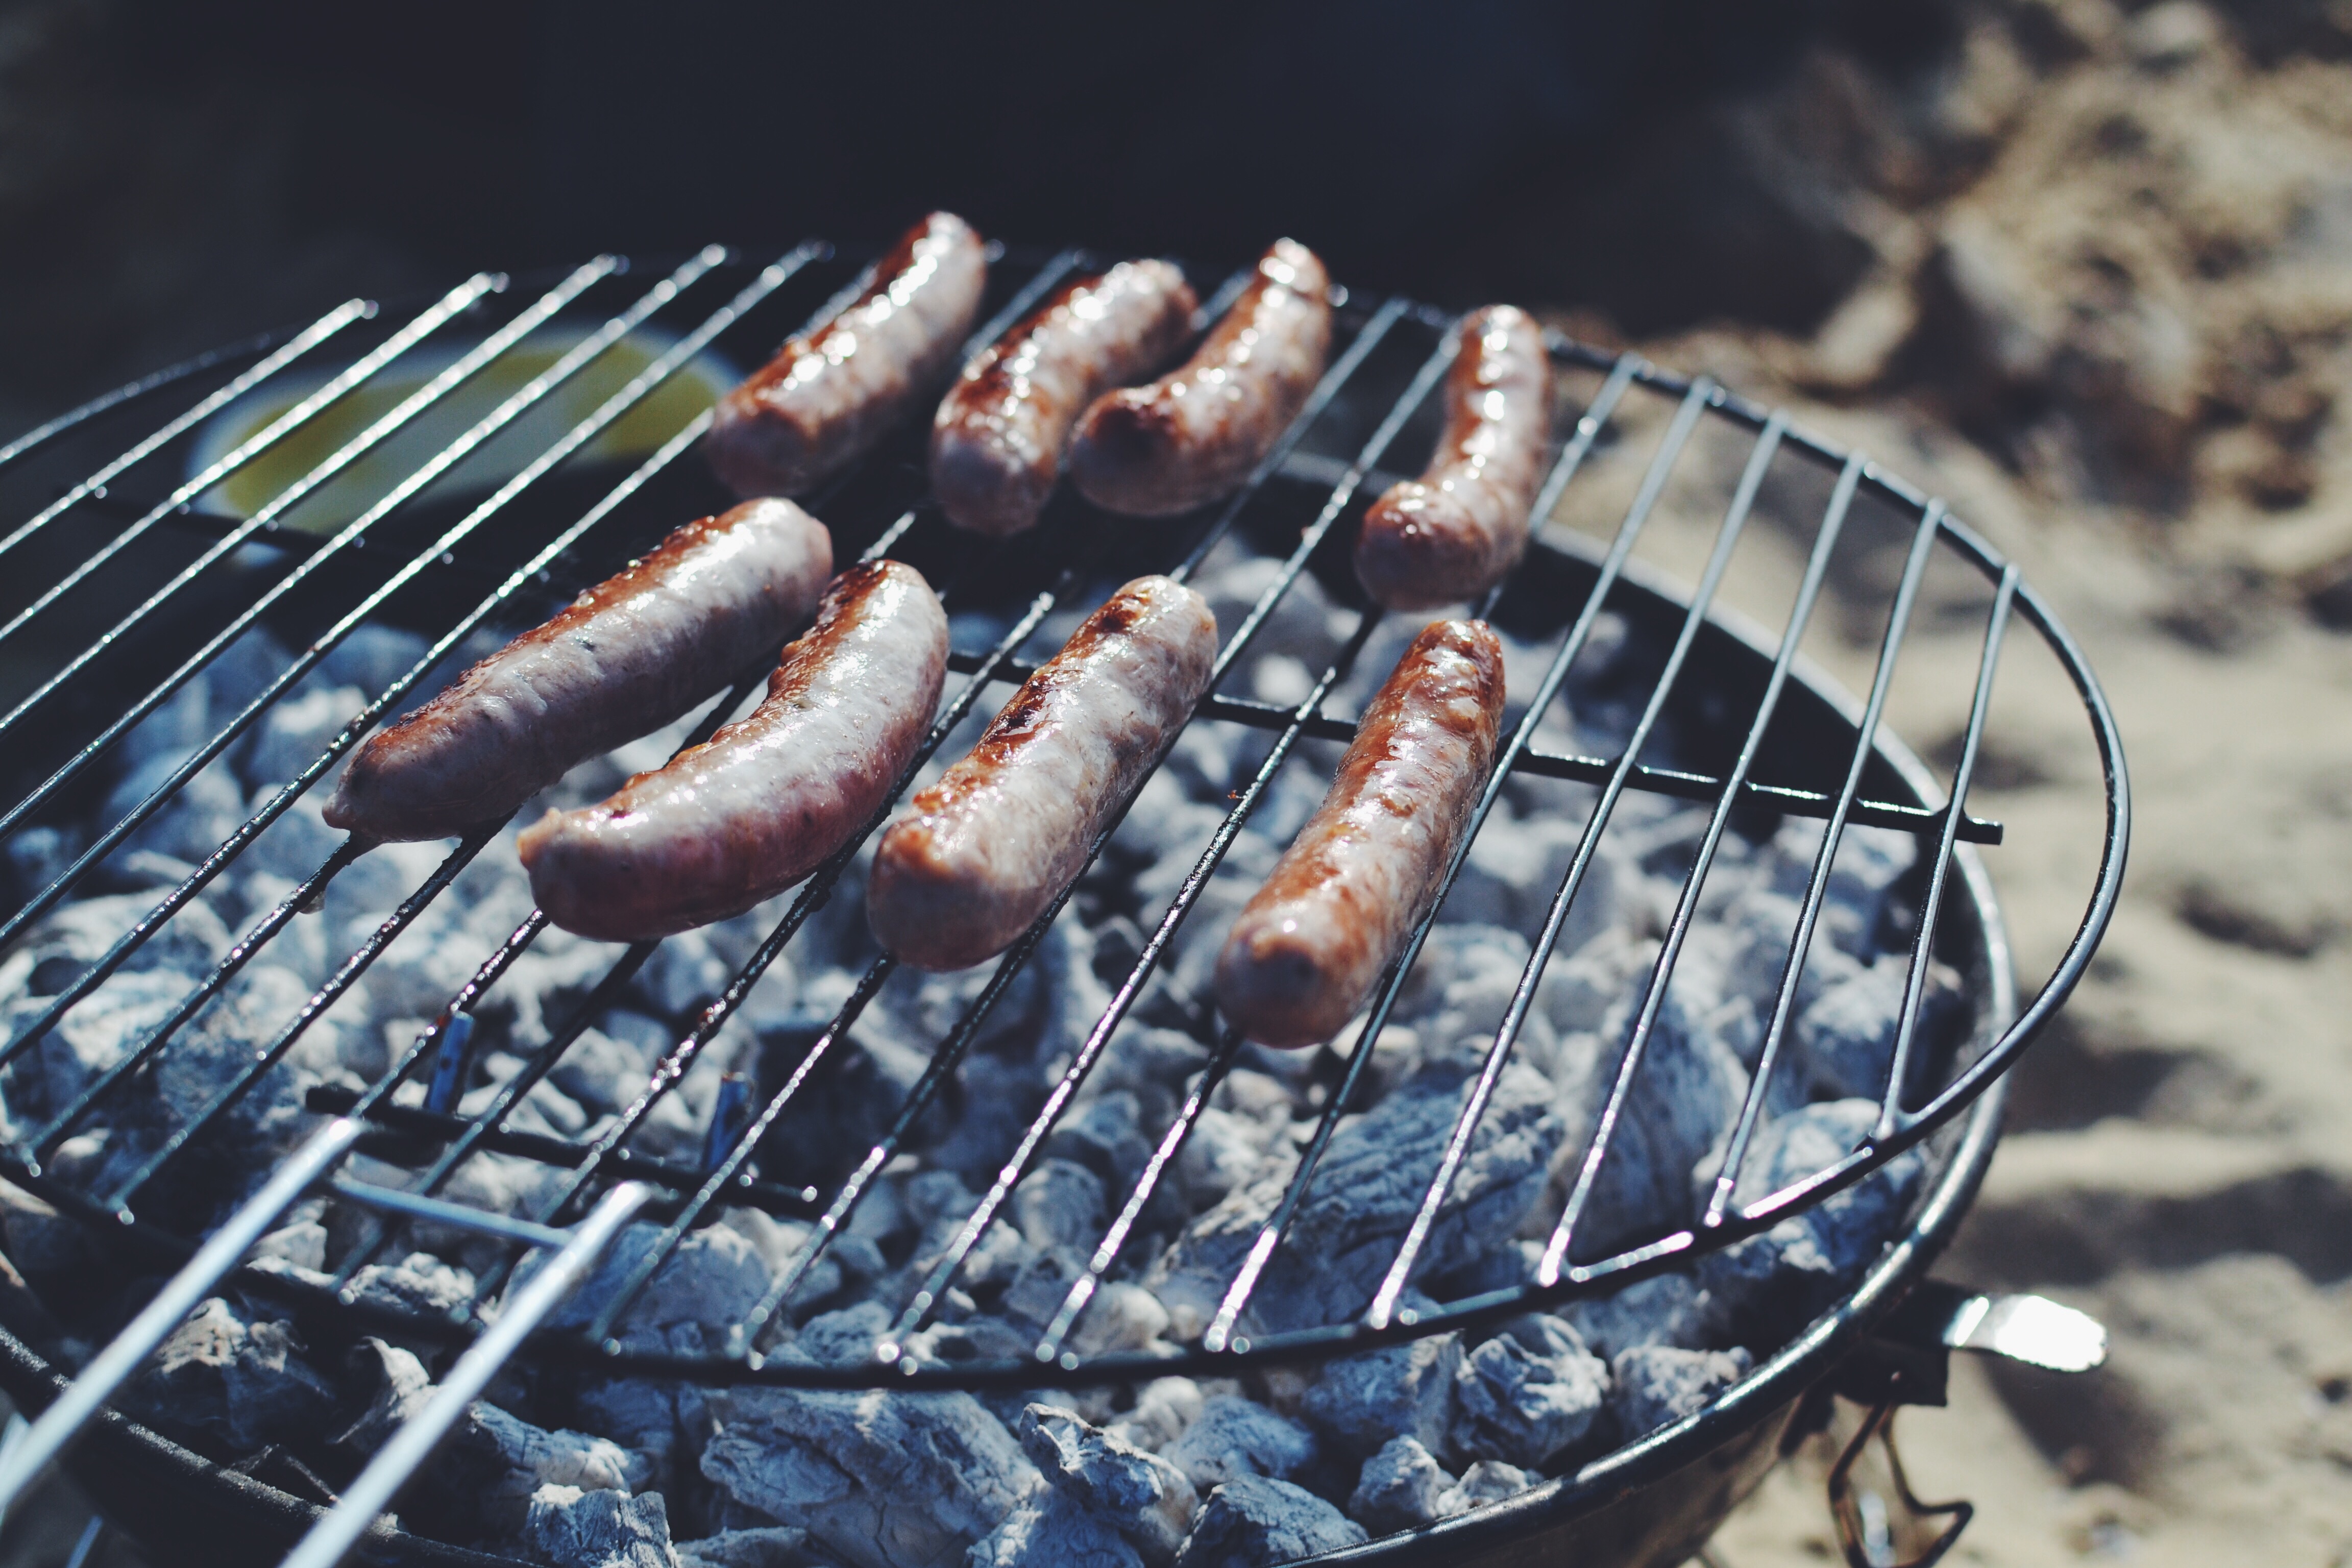 FAMILY BARBECUE EXPLODED AND SHOWERED MUM WITH SAUSAGES